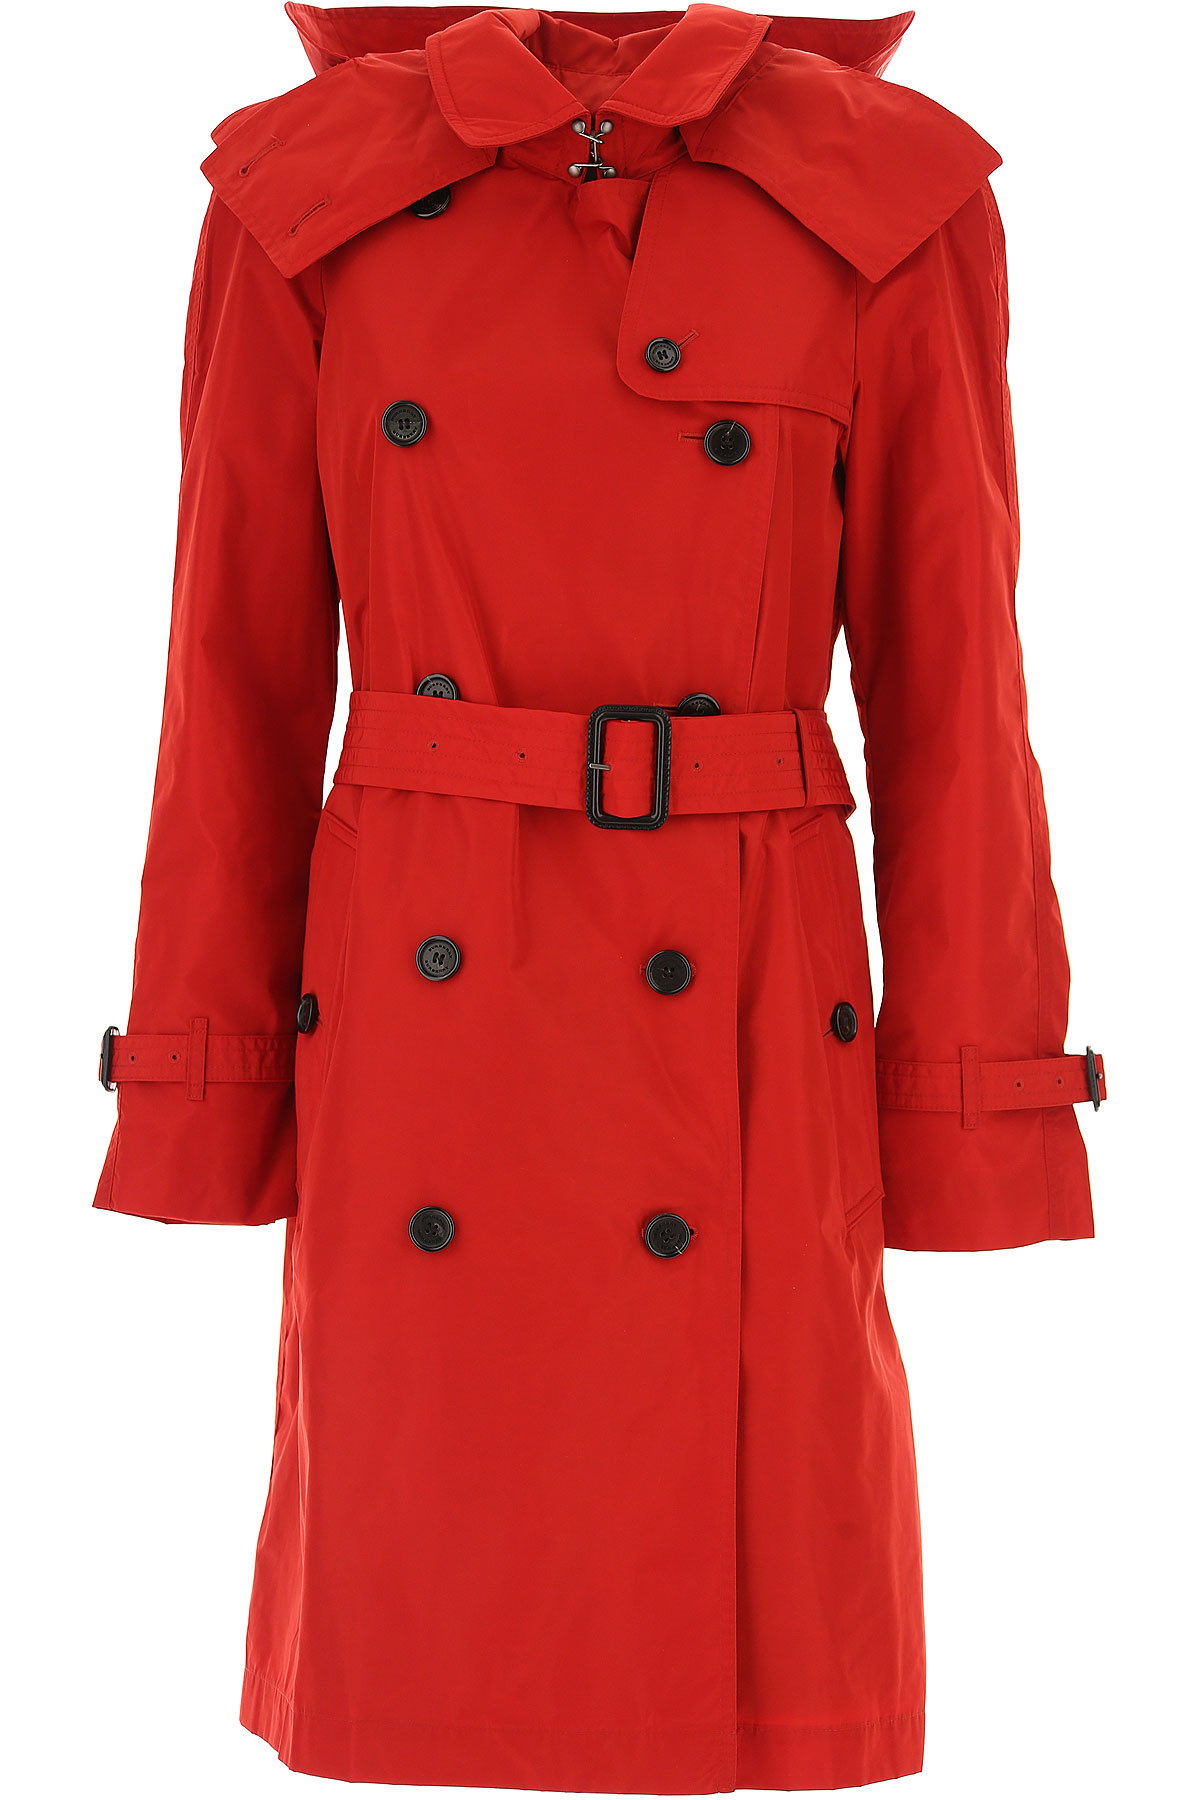 Burberry Manteau Femme, Rouge, Polyester, 2017, 38 40